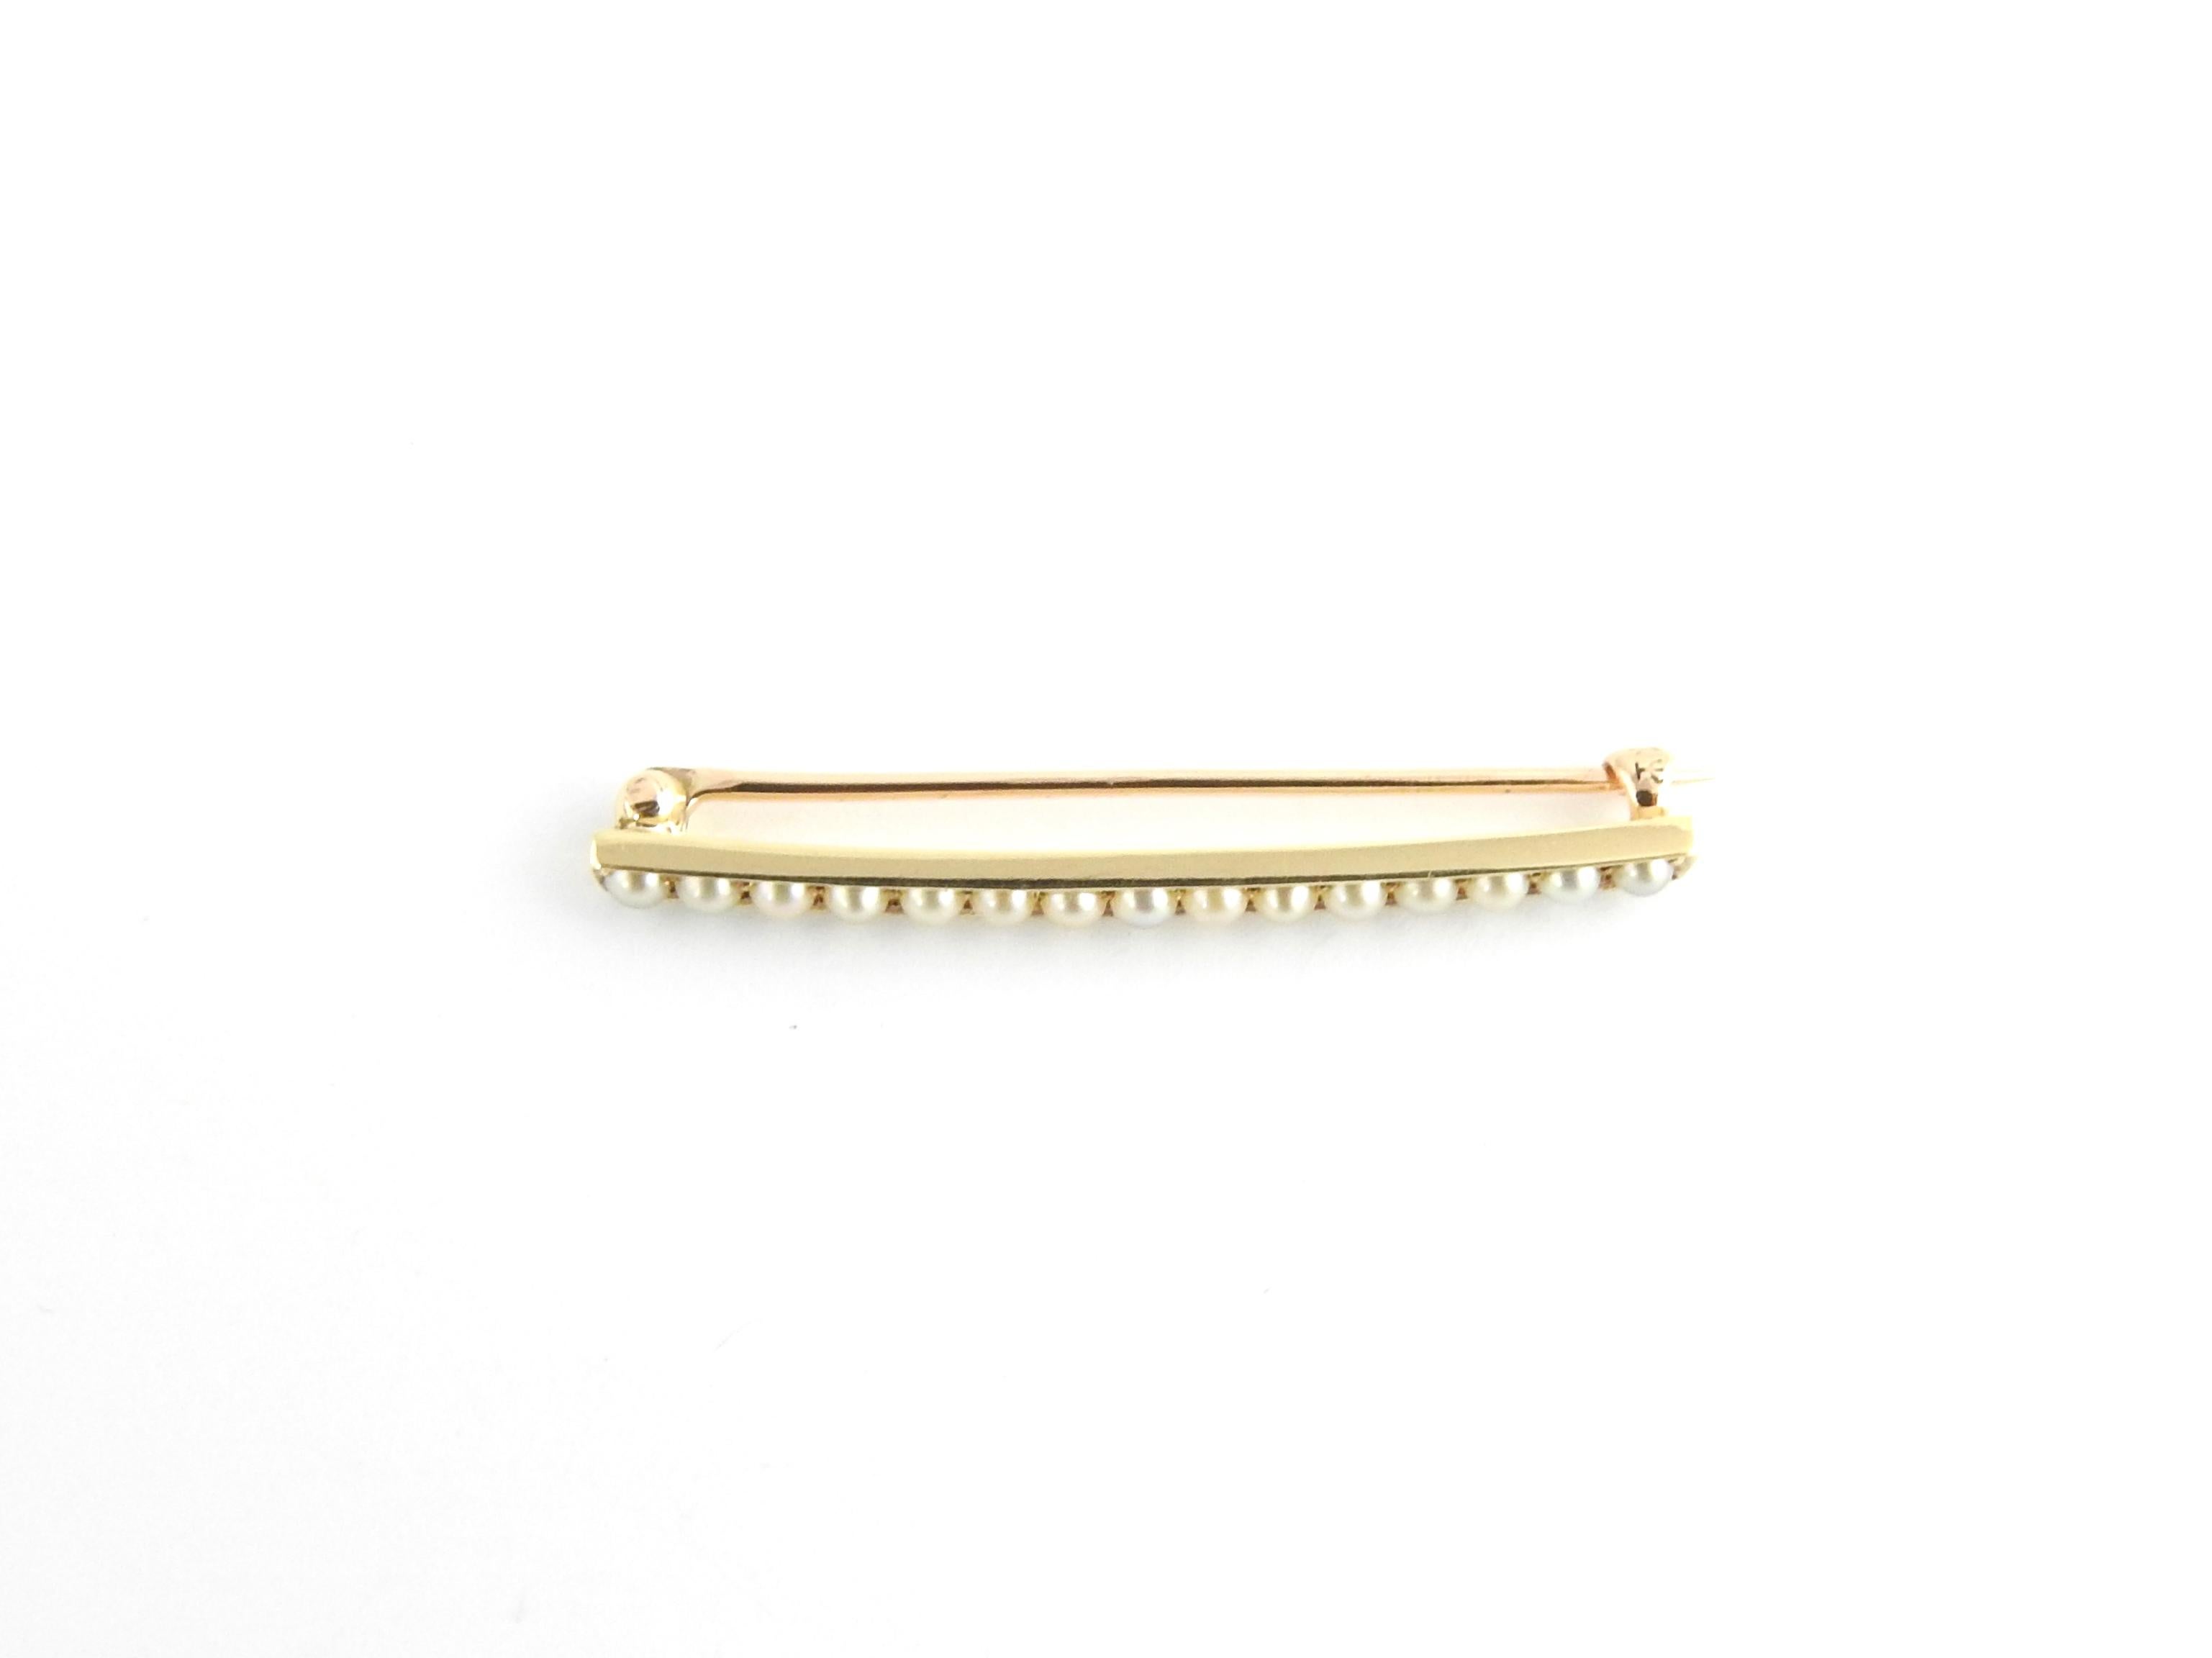 Vintage 14 Karat Yellow Gold and Seed Pearl Bar Pin

This elegant bar pin features 15 seed pearls set in classic 14K yellow gold.

Size: 41 mm x 3.5 mm

Weight: 2.1 dwt. / 3.4 gr.

Stamped: 14

Very good condition, professionally polished.

Will